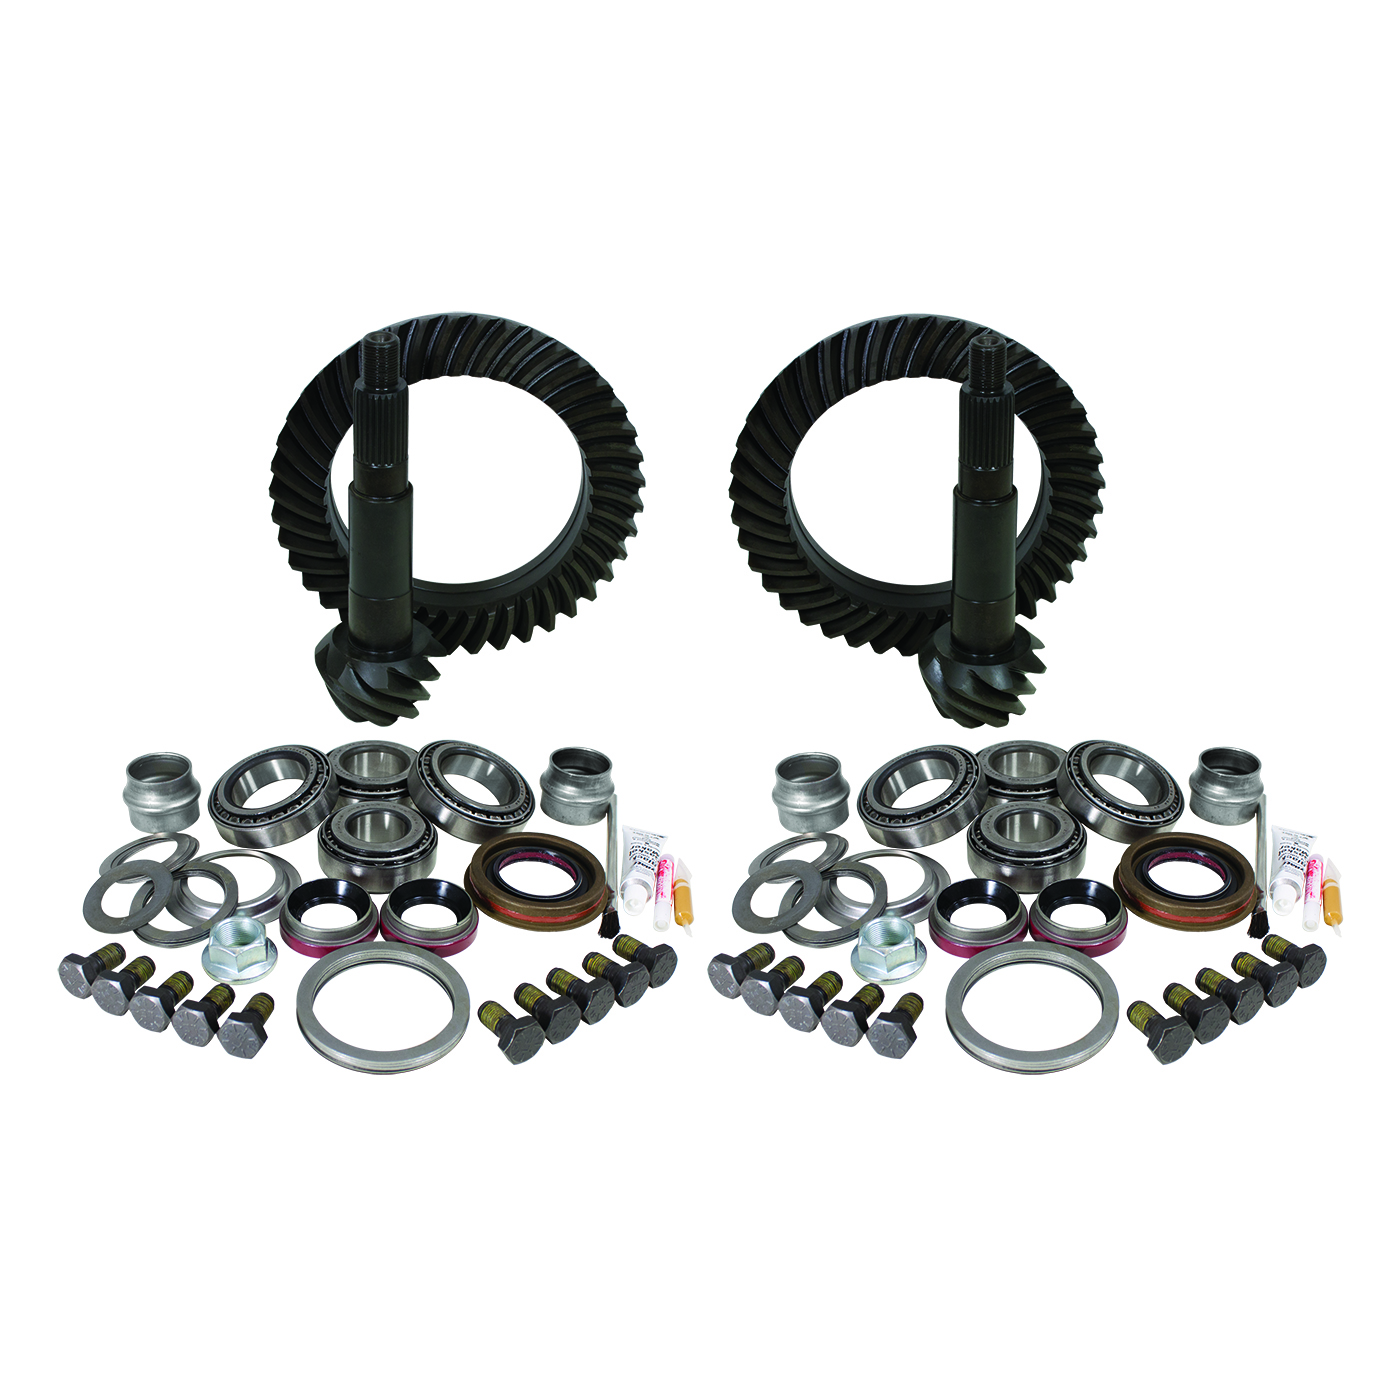 USA Standard ZGK011 Gear & Install Kit Package, For Jeep Tj Rubicon, 5.13 Ratio